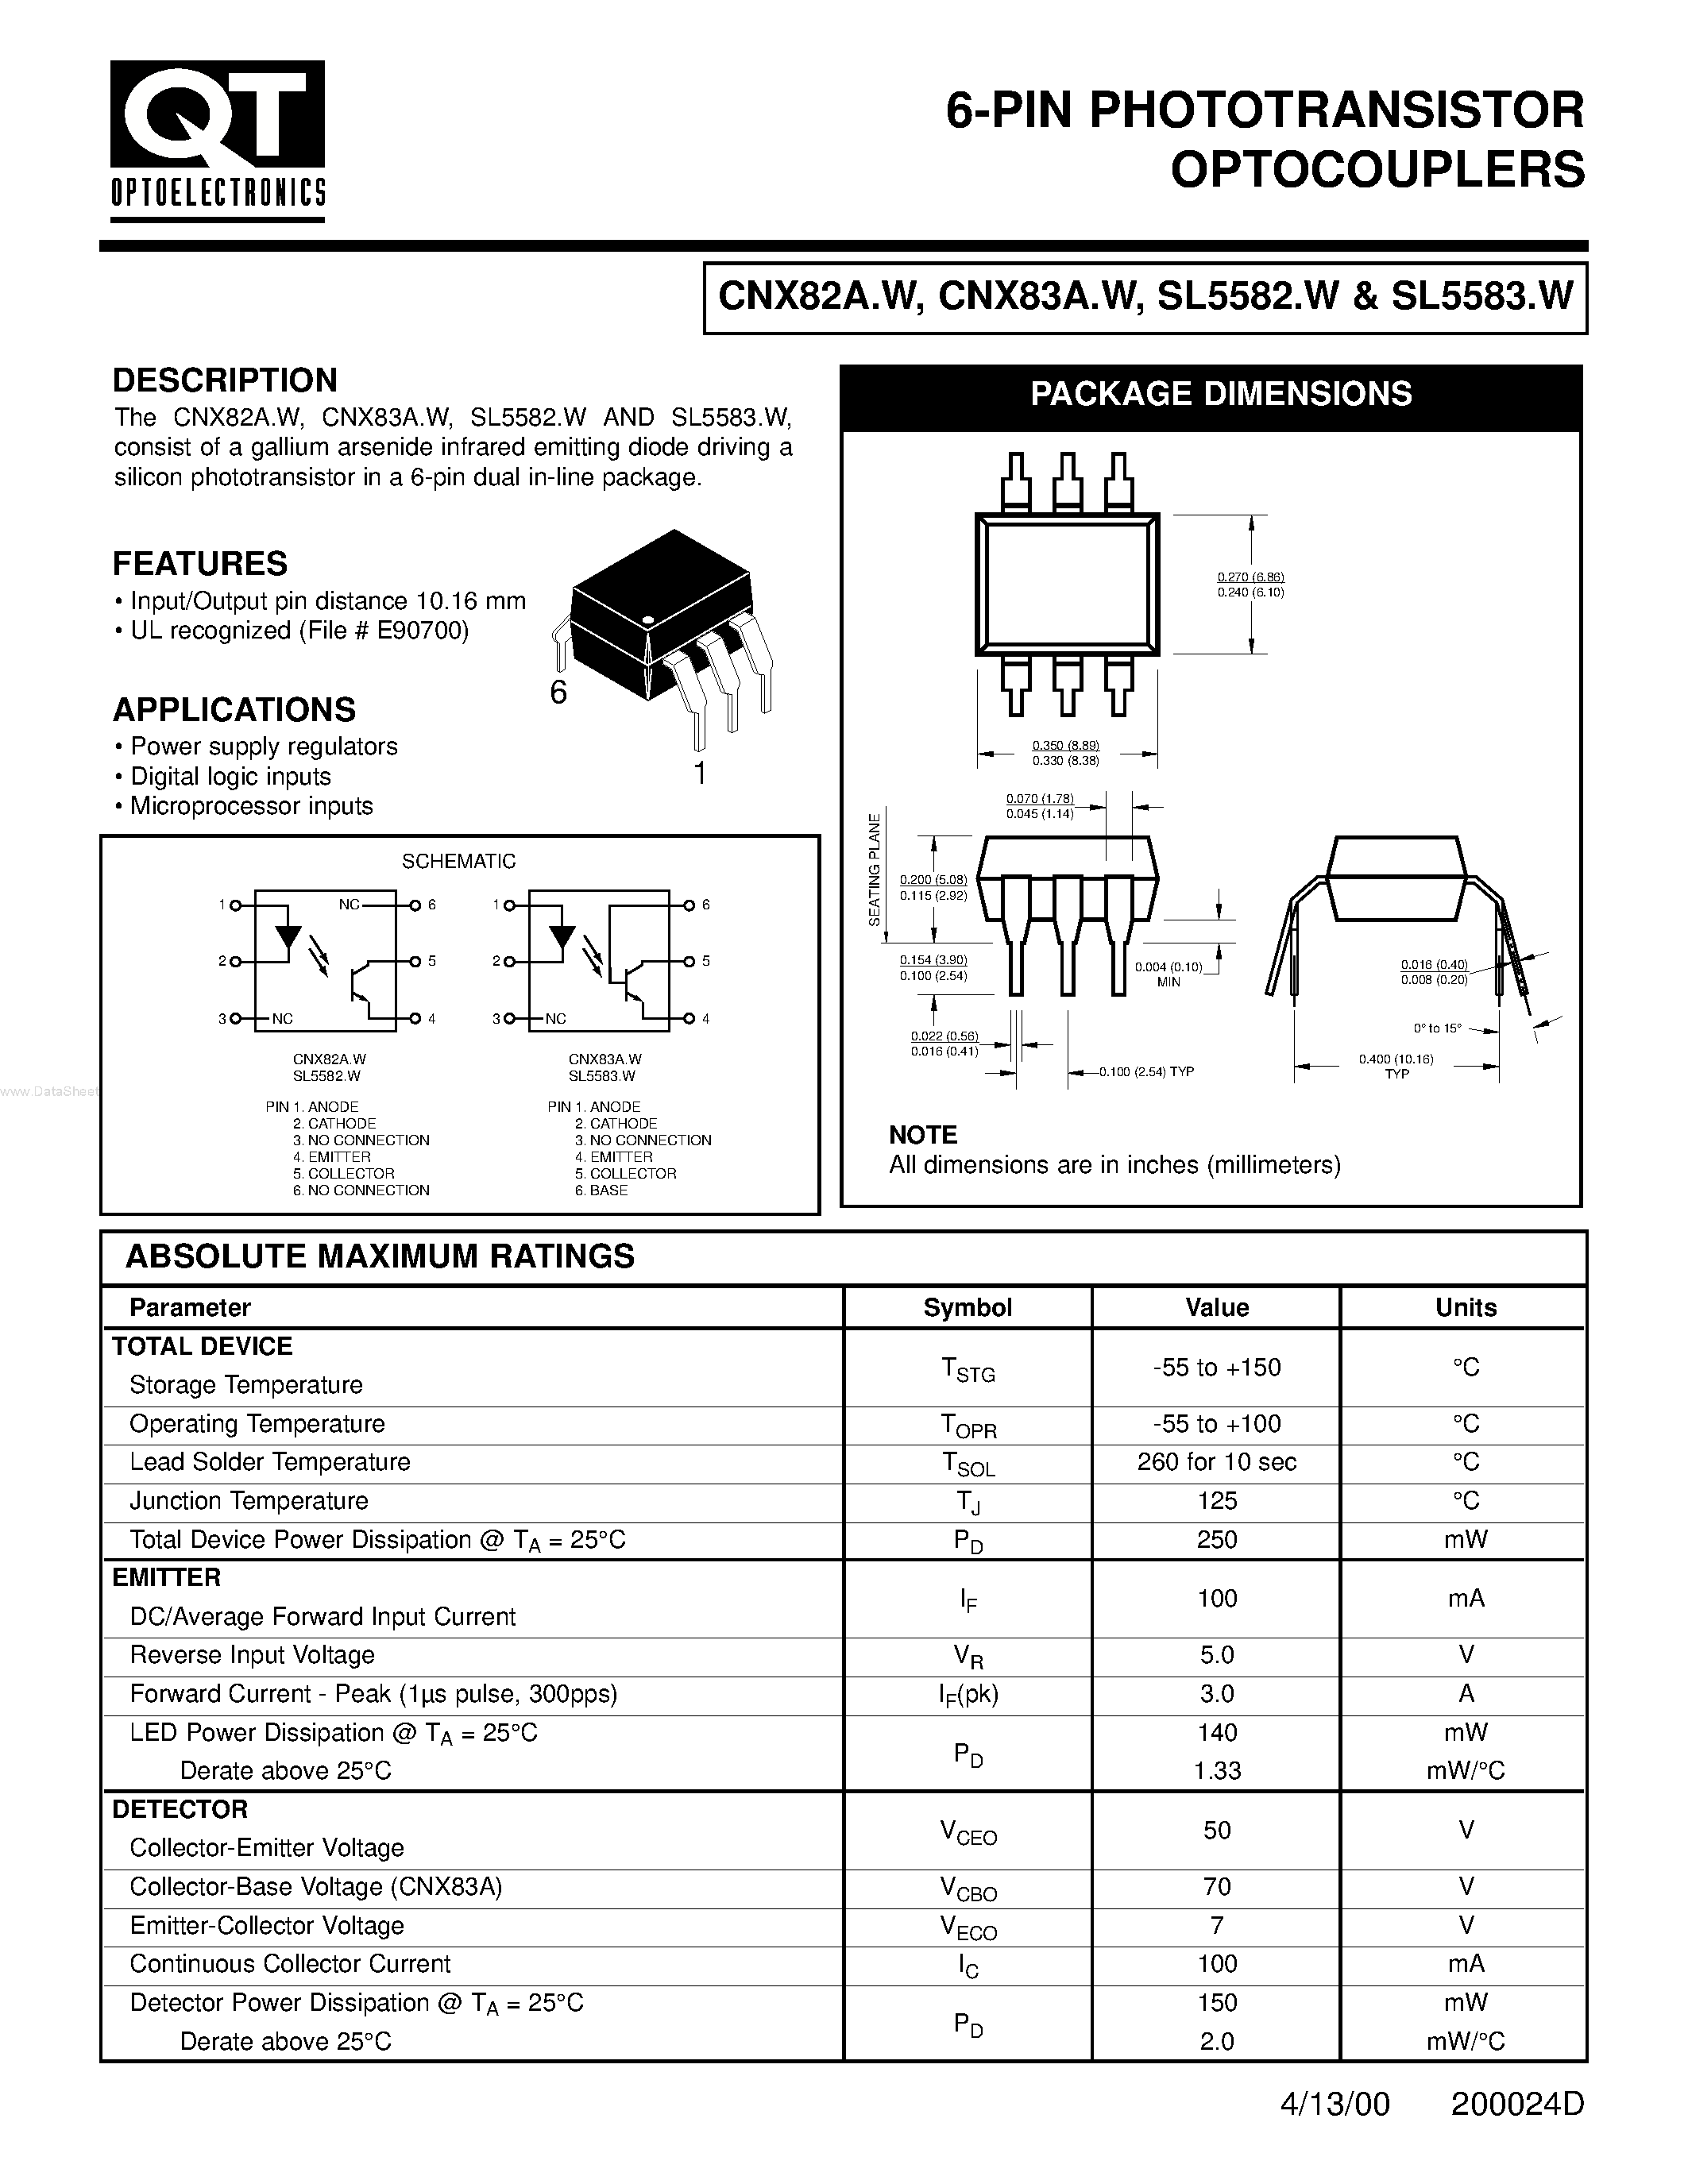 Datasheet CNX83A.W - 6-pin phototransistor optocouplers page 1